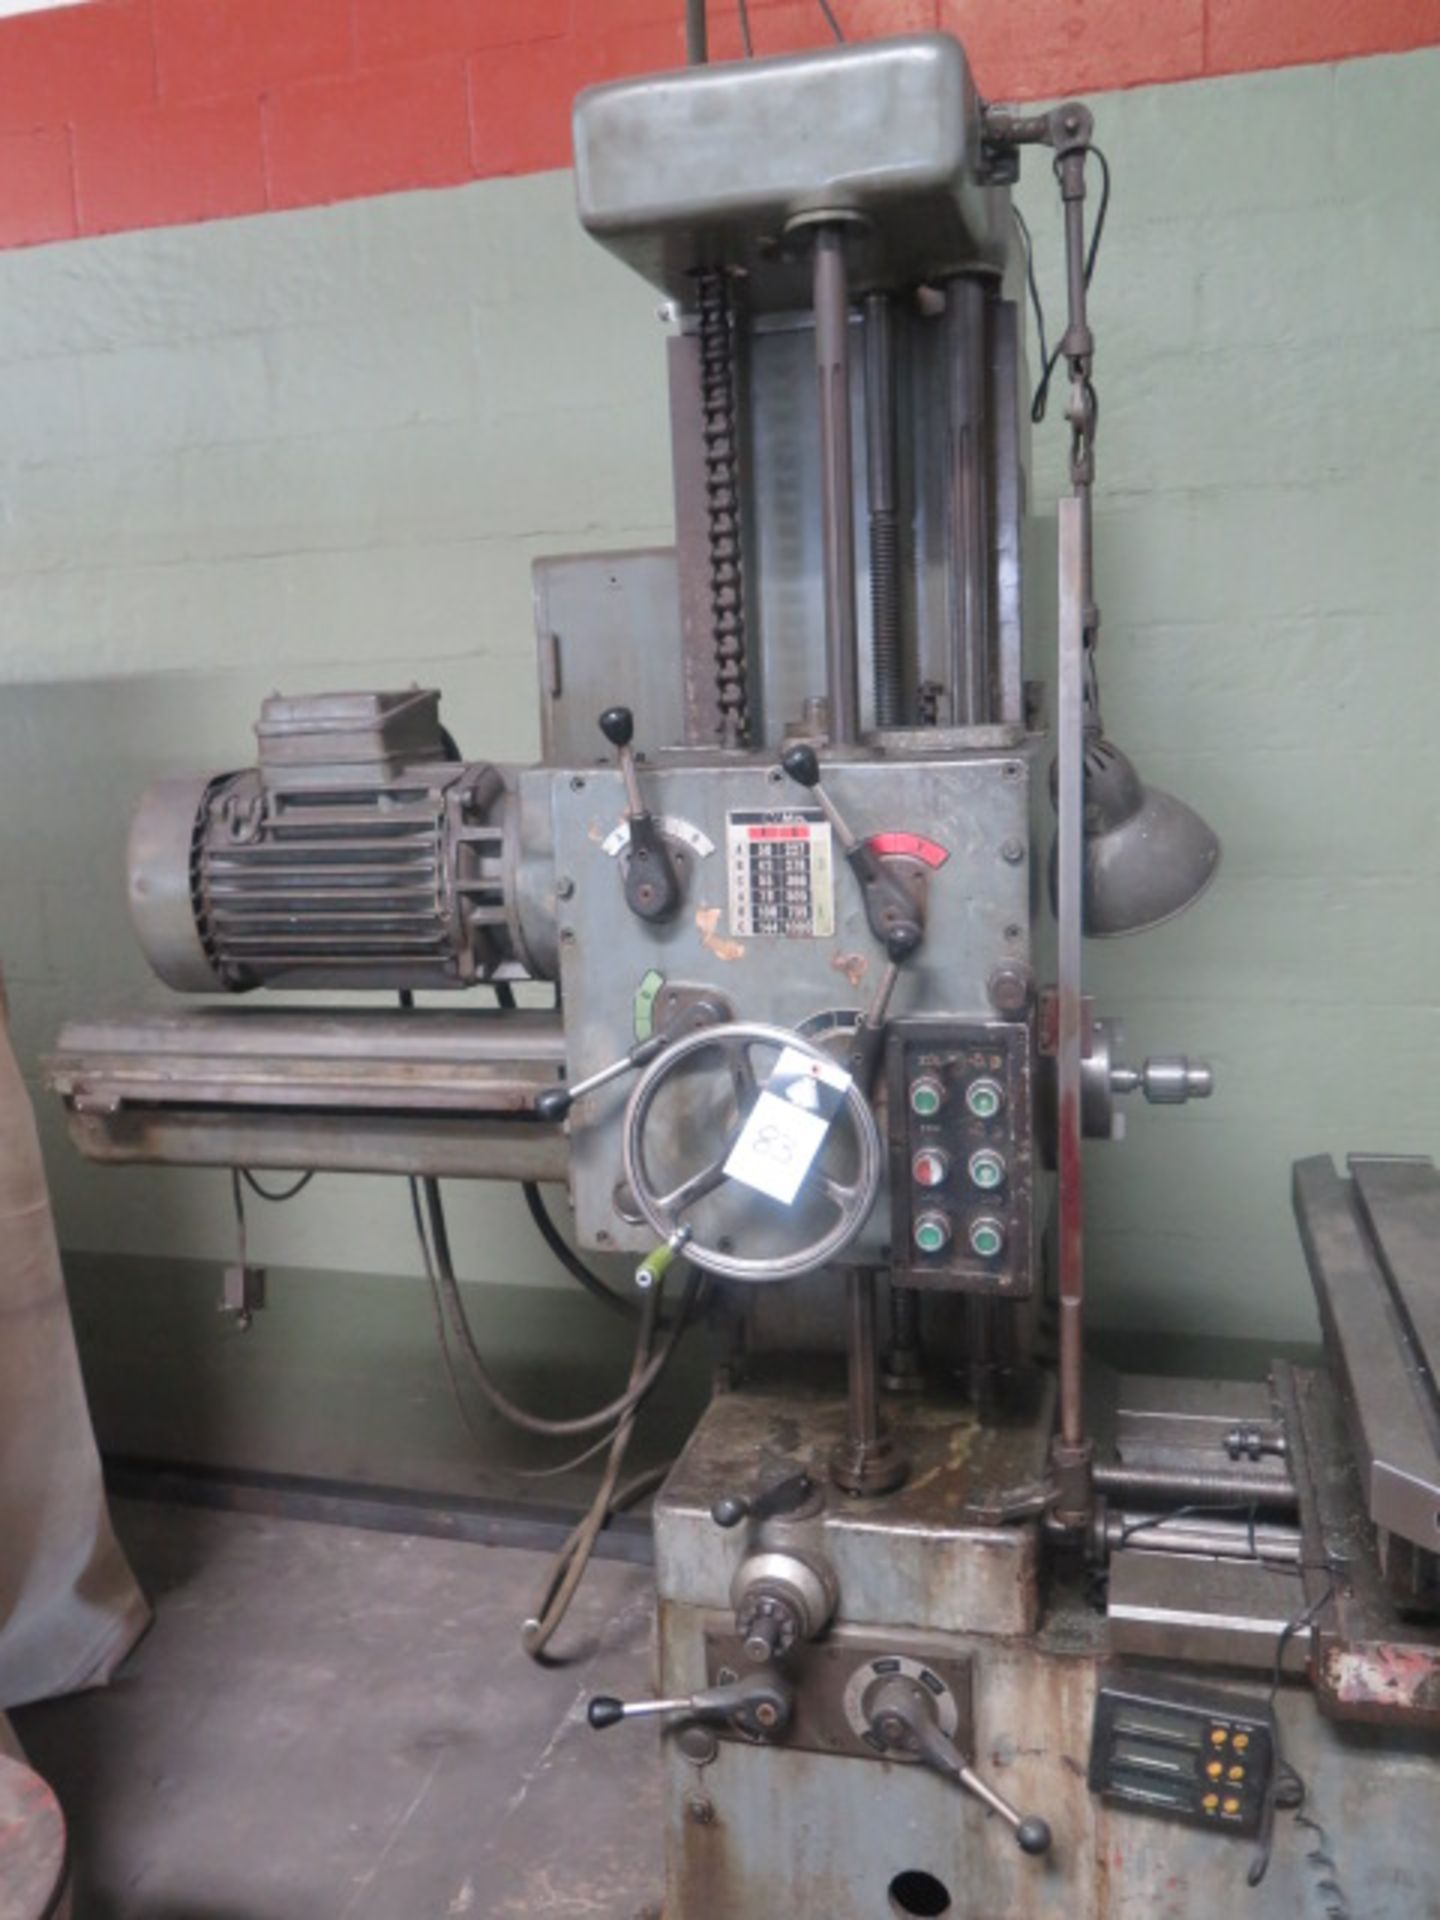 SuperMill J Horizontal Boring Mill w/ 30-1000 RPM, 2 ½” Spindle, 50-Taper Spindle, 16 ½” Boring - Image 2 of 7